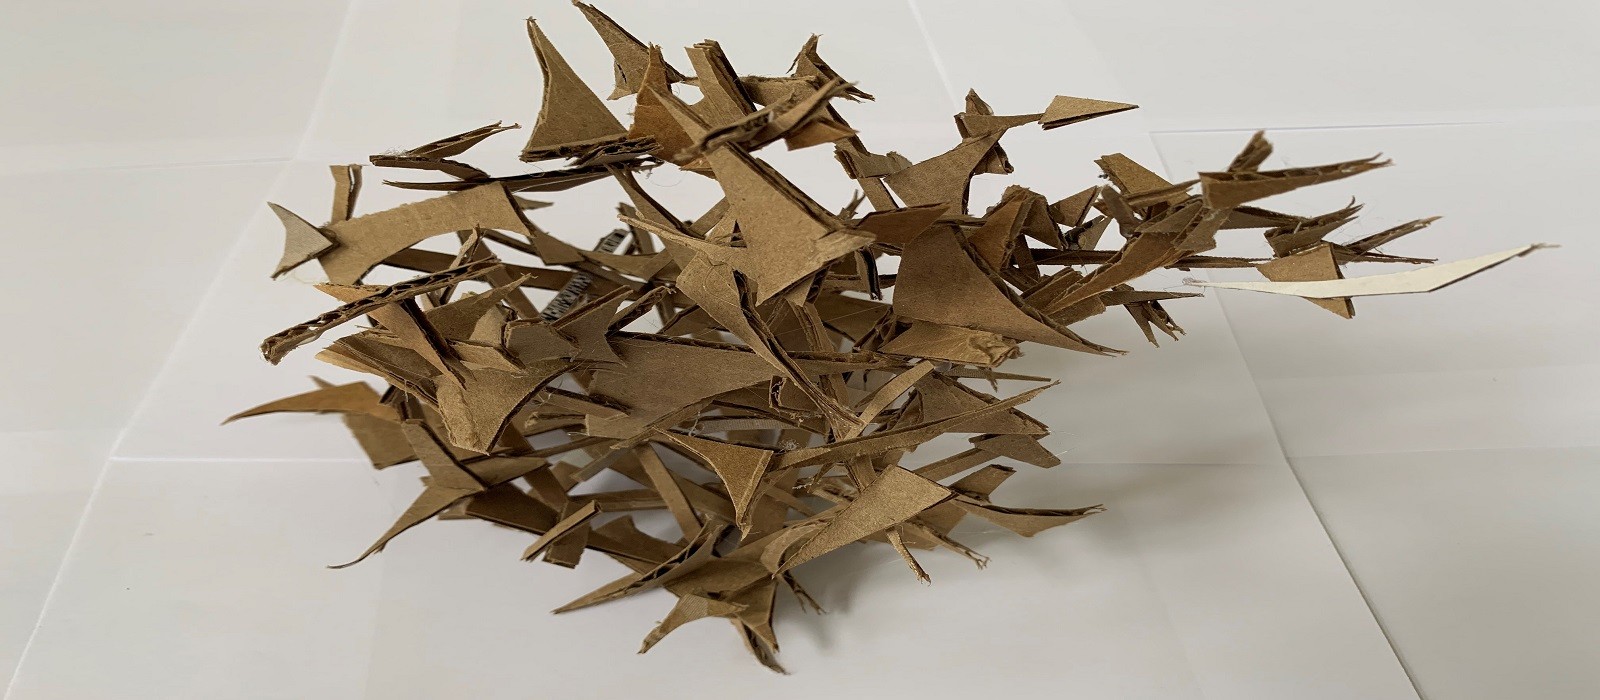 Recycled cut offs from cardboard box recycled sculpture